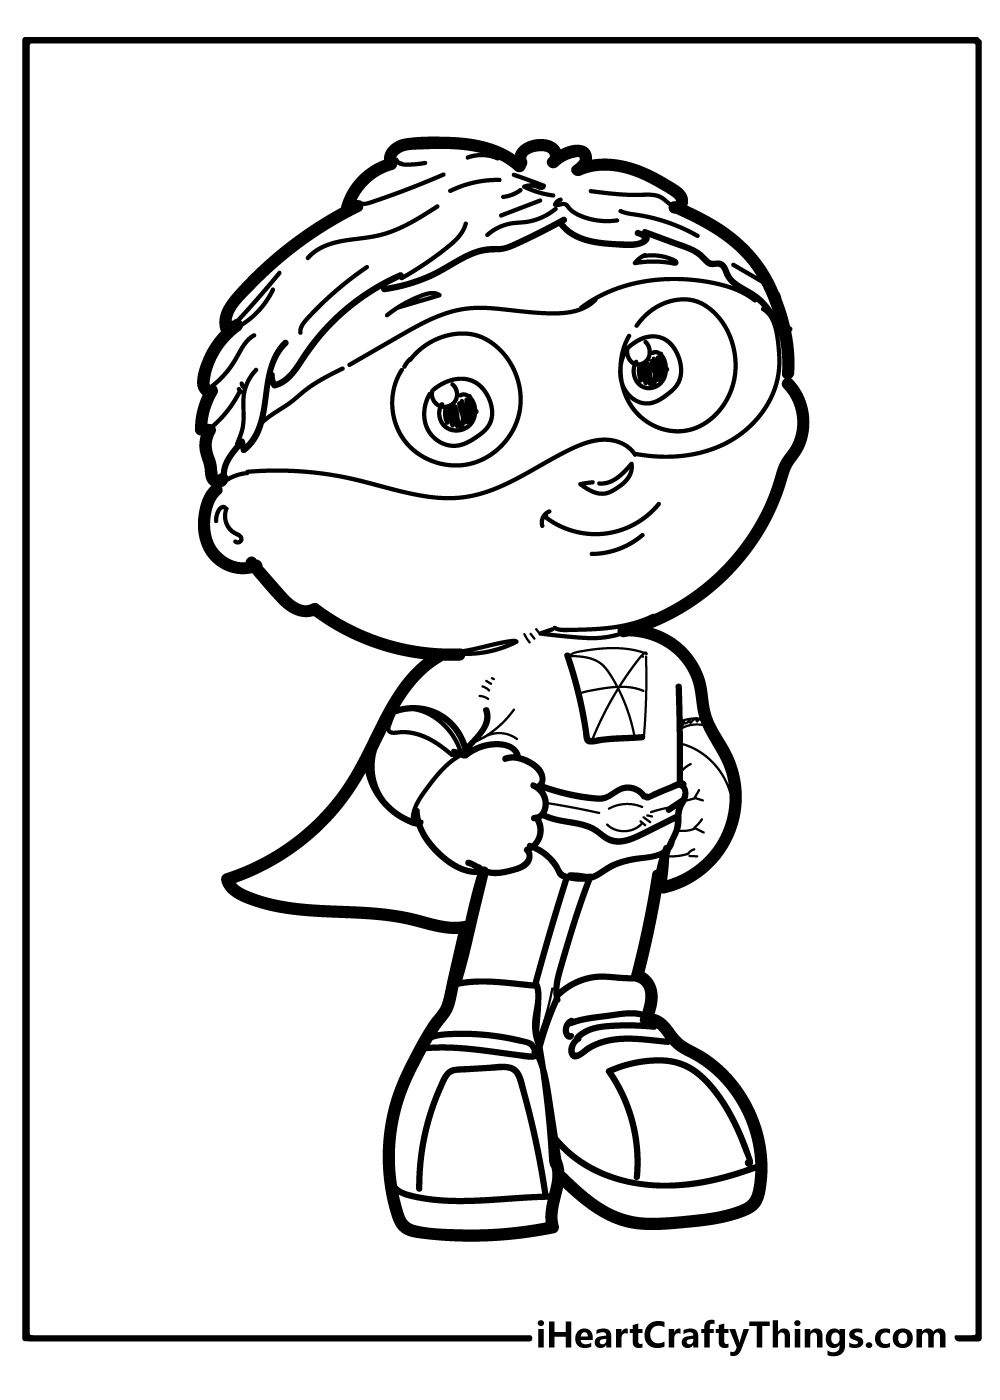 Super Coloring Book for kids free printable